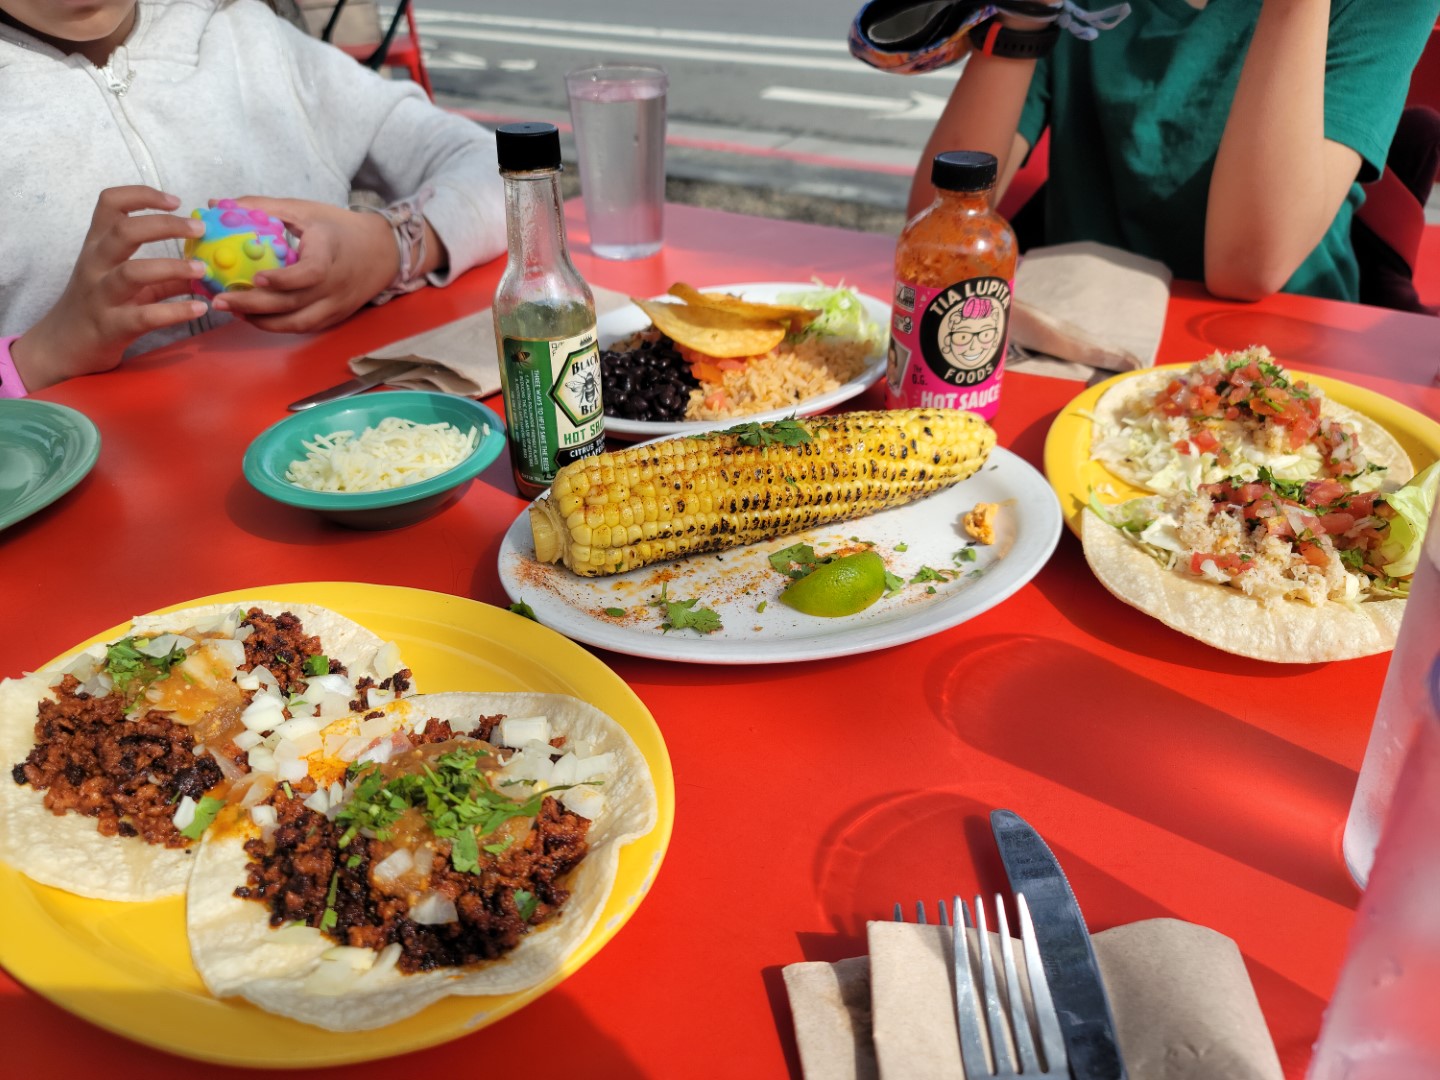 Mexican food on plates on top of red table cloth with hot sauce bottles nearby